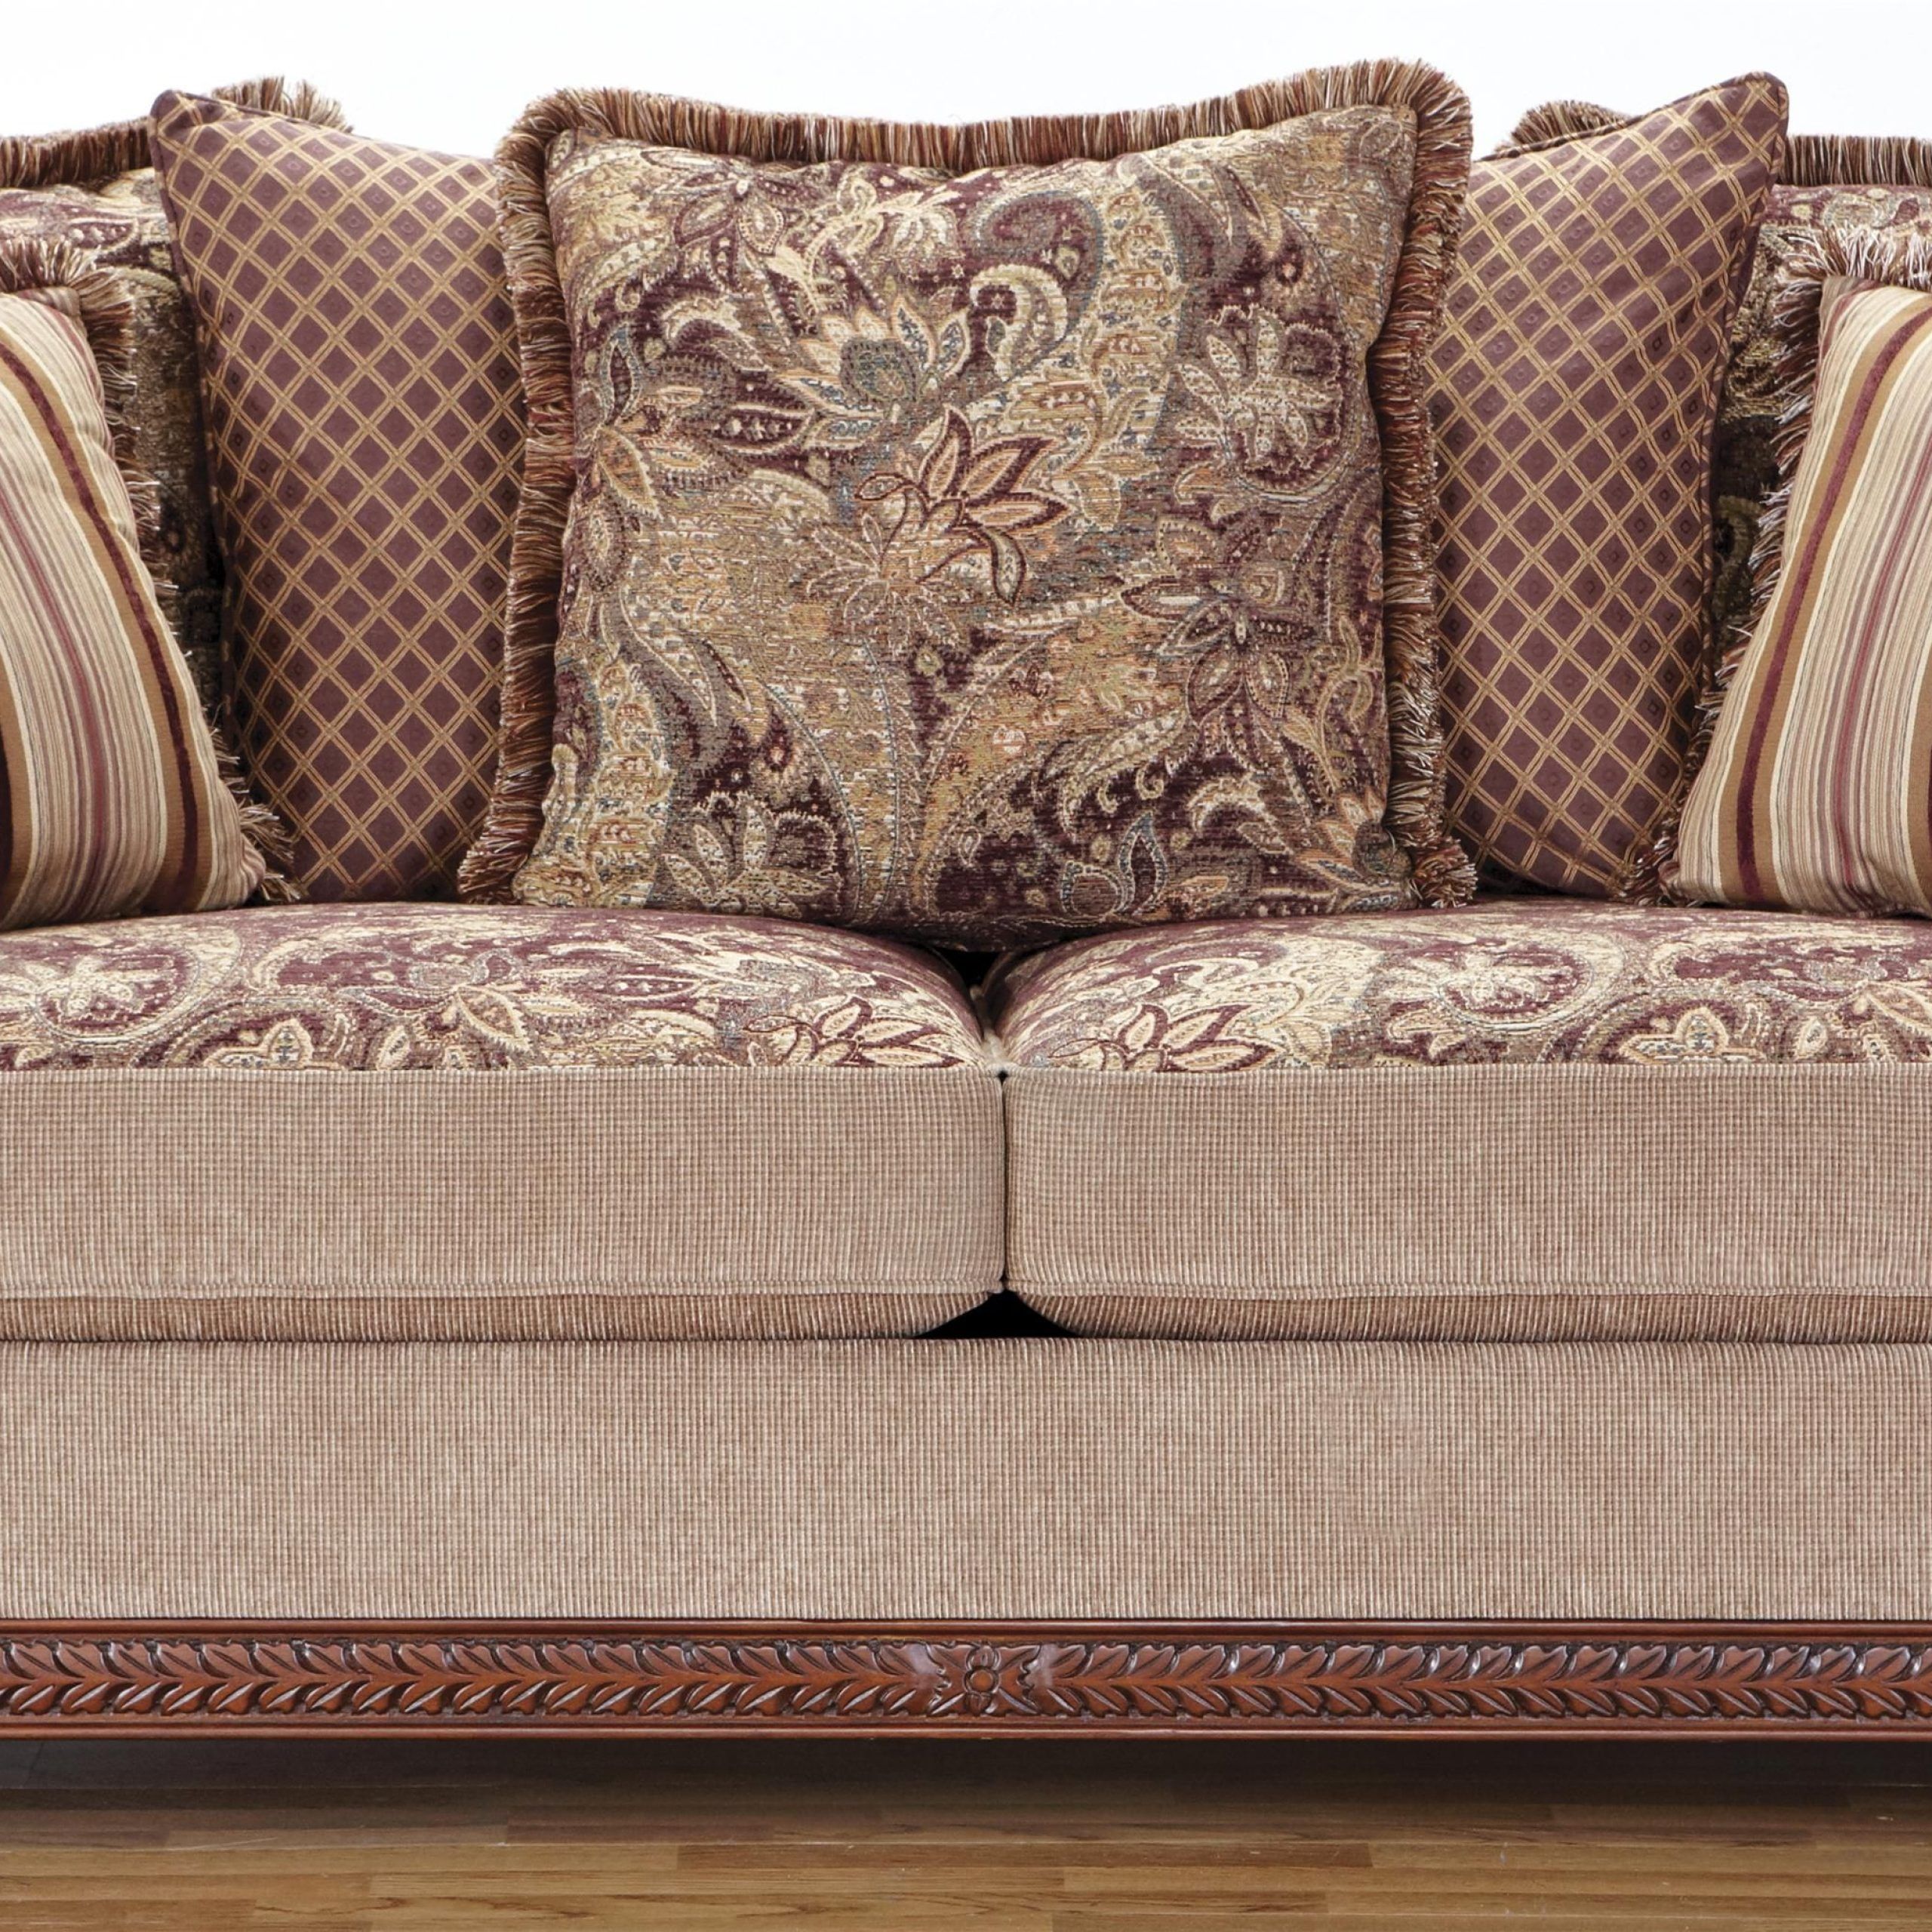 8716 Traditional Rolled Arm Sofa With Decorative Wood Trimhm Within Sofas With Pillowback Wood Bases (Gallery 10 of 20)